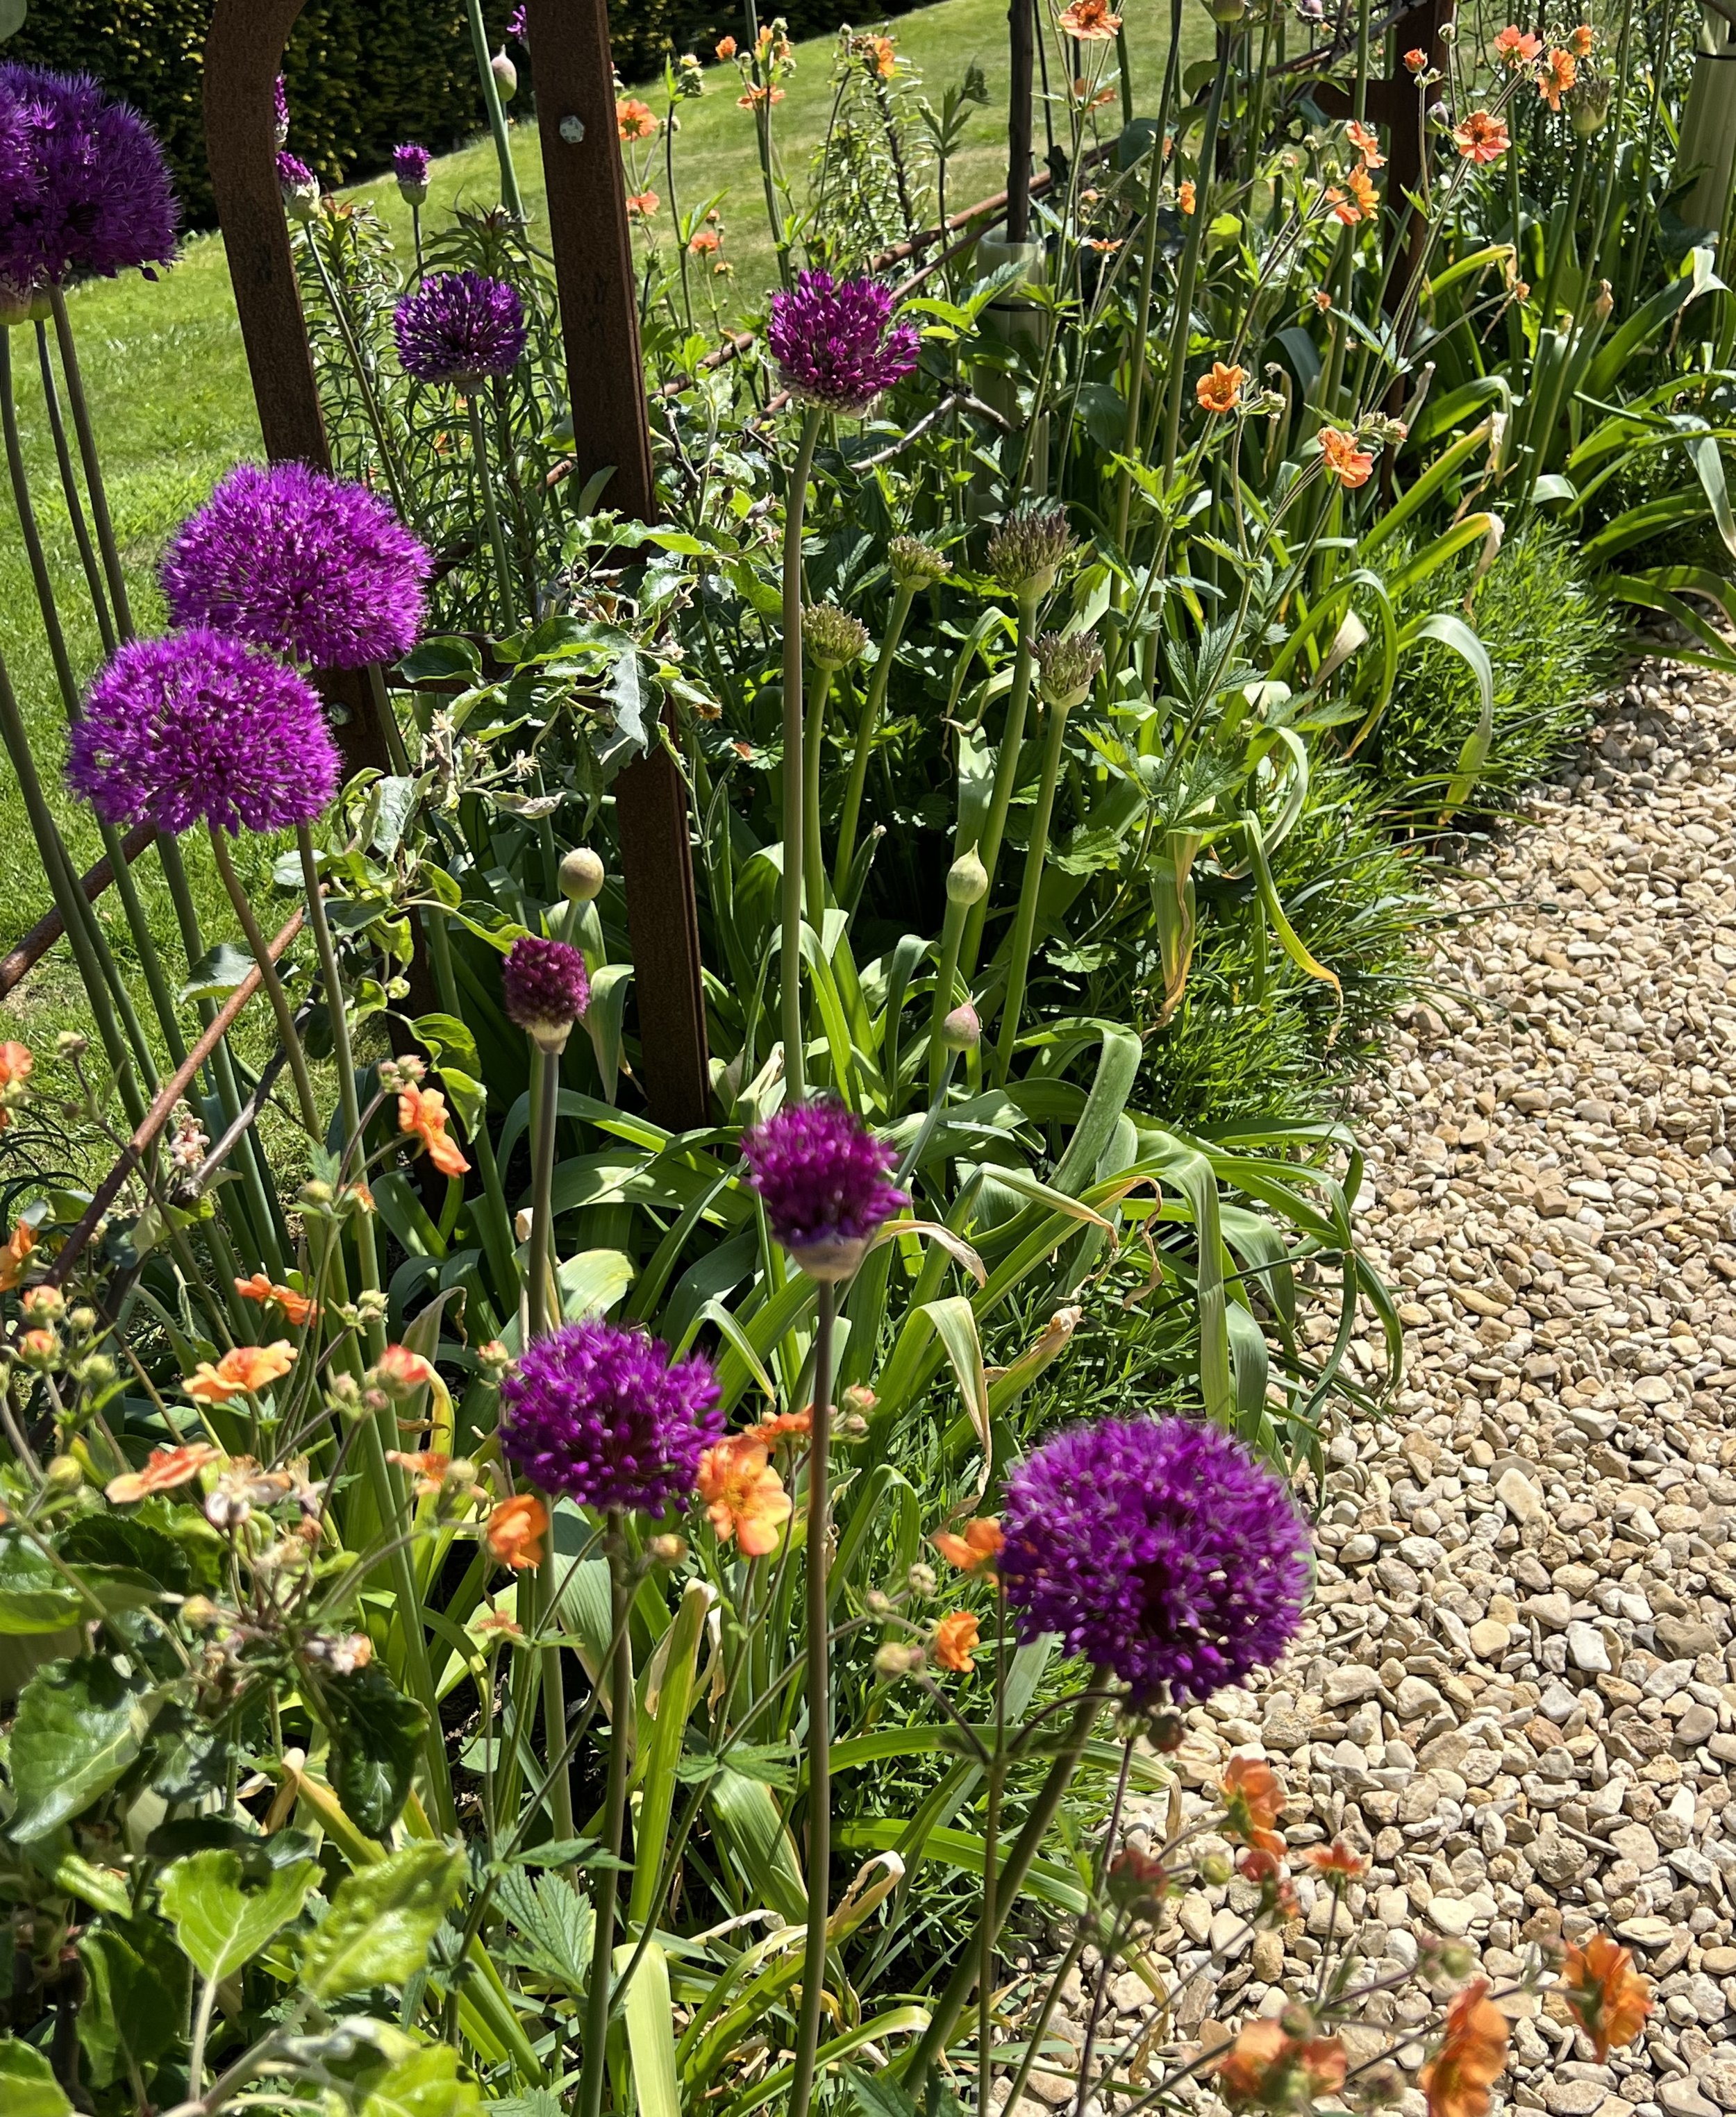 Alliums are set off by Geum ‘Totally Tangerine’